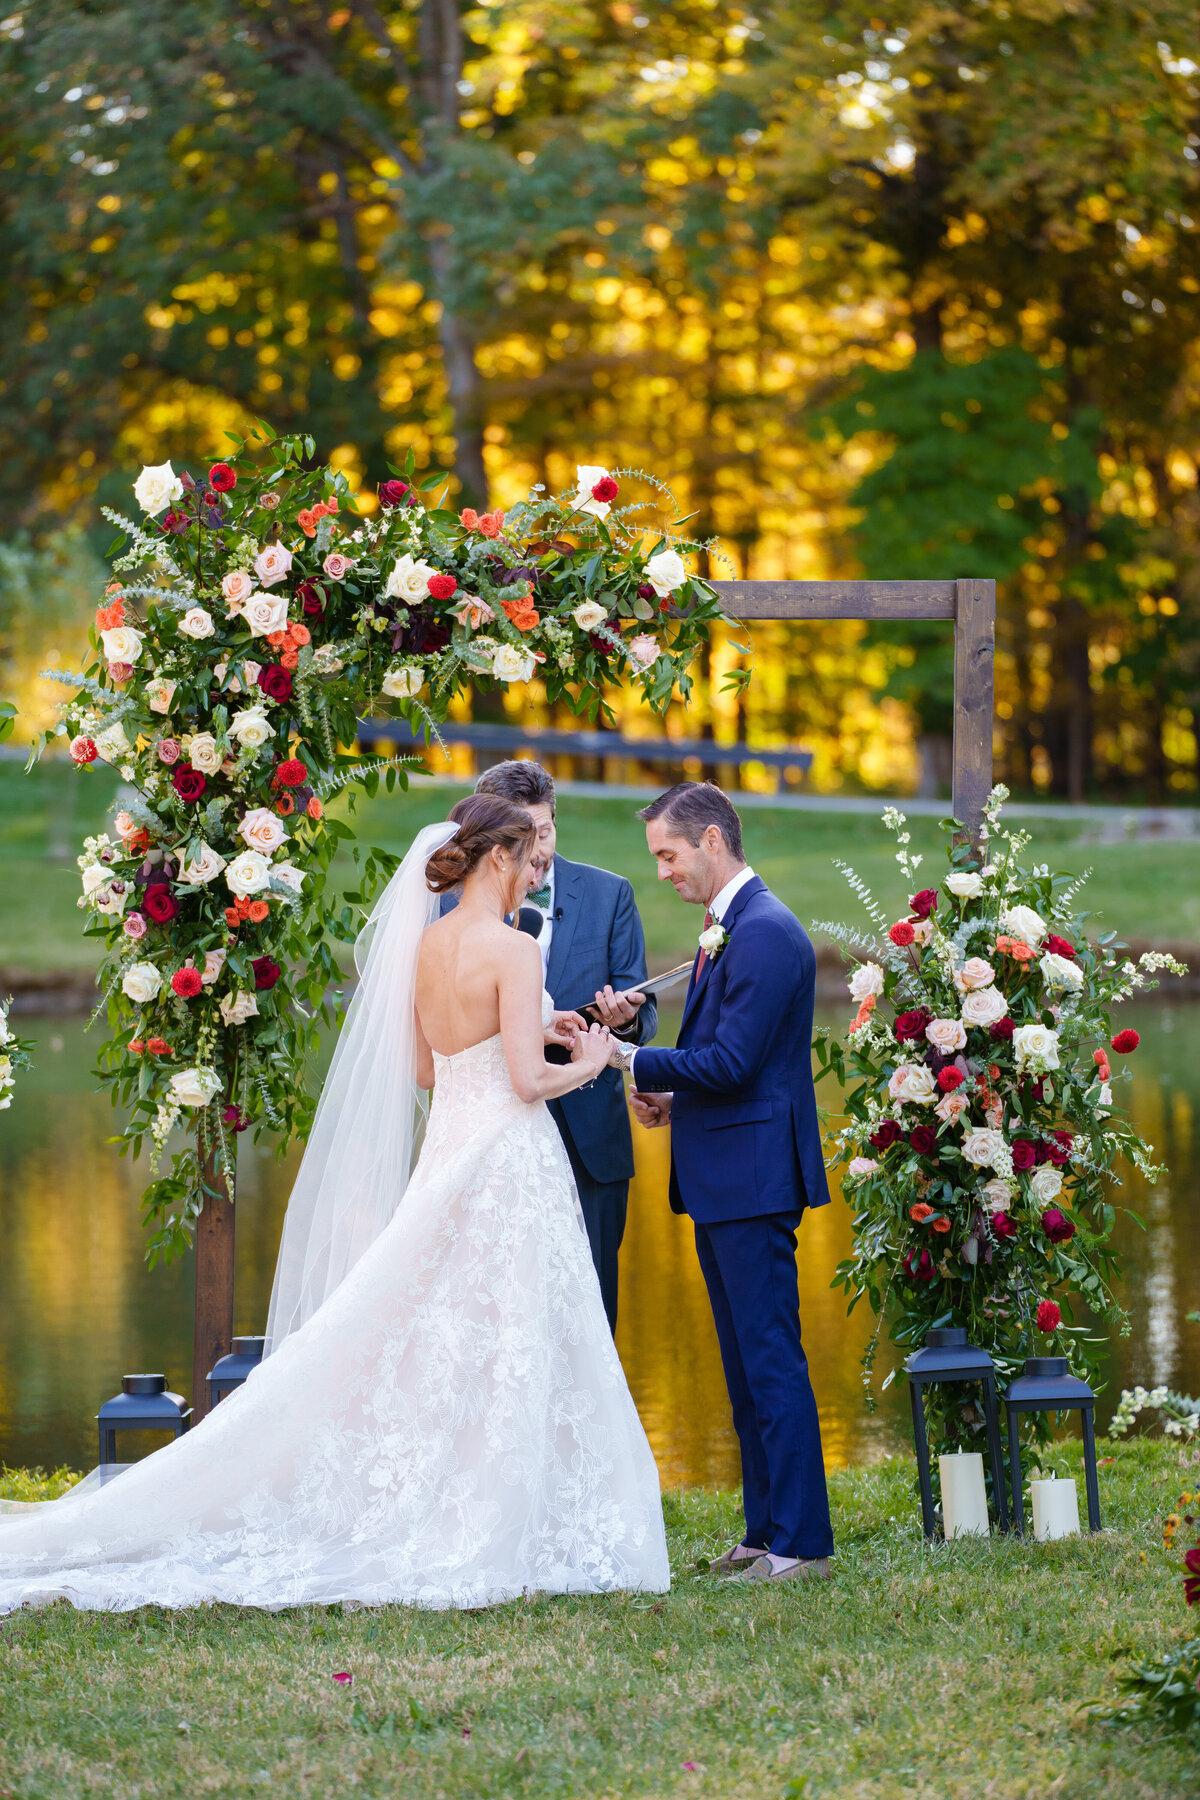 the-finer-things-event-planning-full-wedding-services-columbus-ohio-luxury-outdoor-ceremony